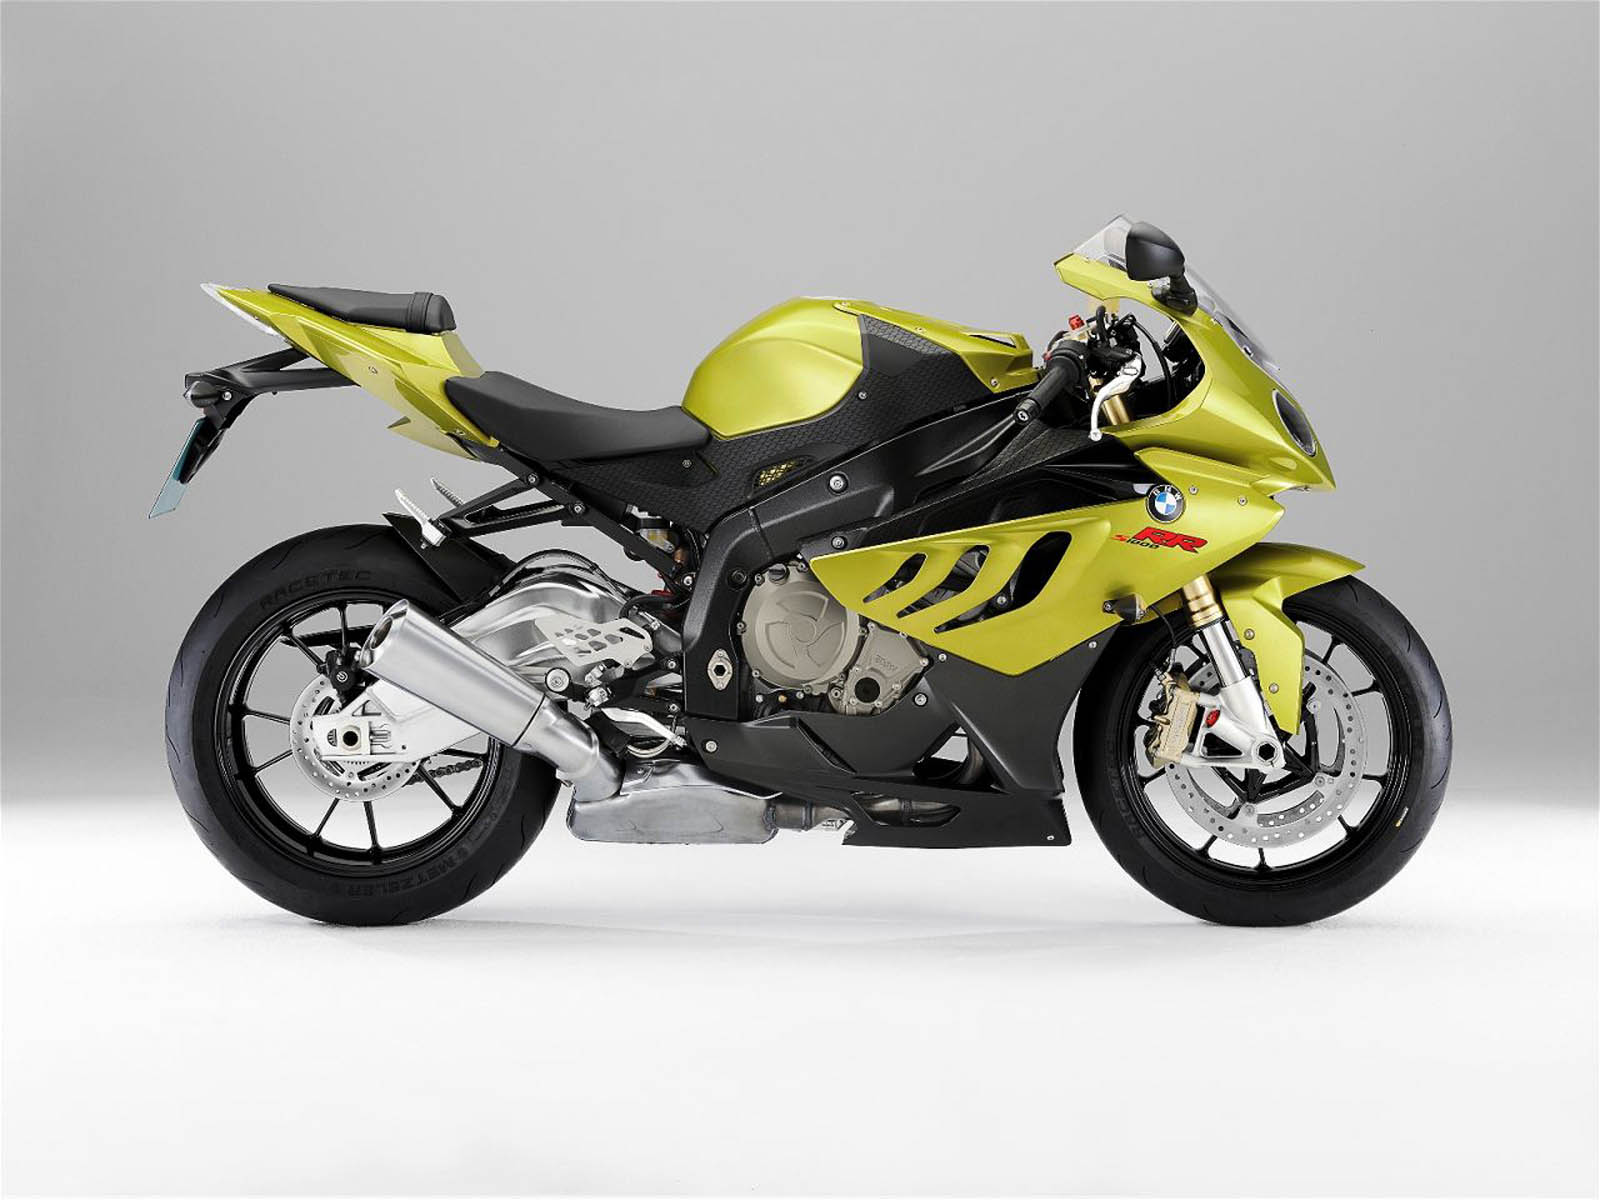 Bmw S 1000 Rr Bike Wallpapers - Bmw S 1000 Rr , HD Wallpaper & Backgrounds